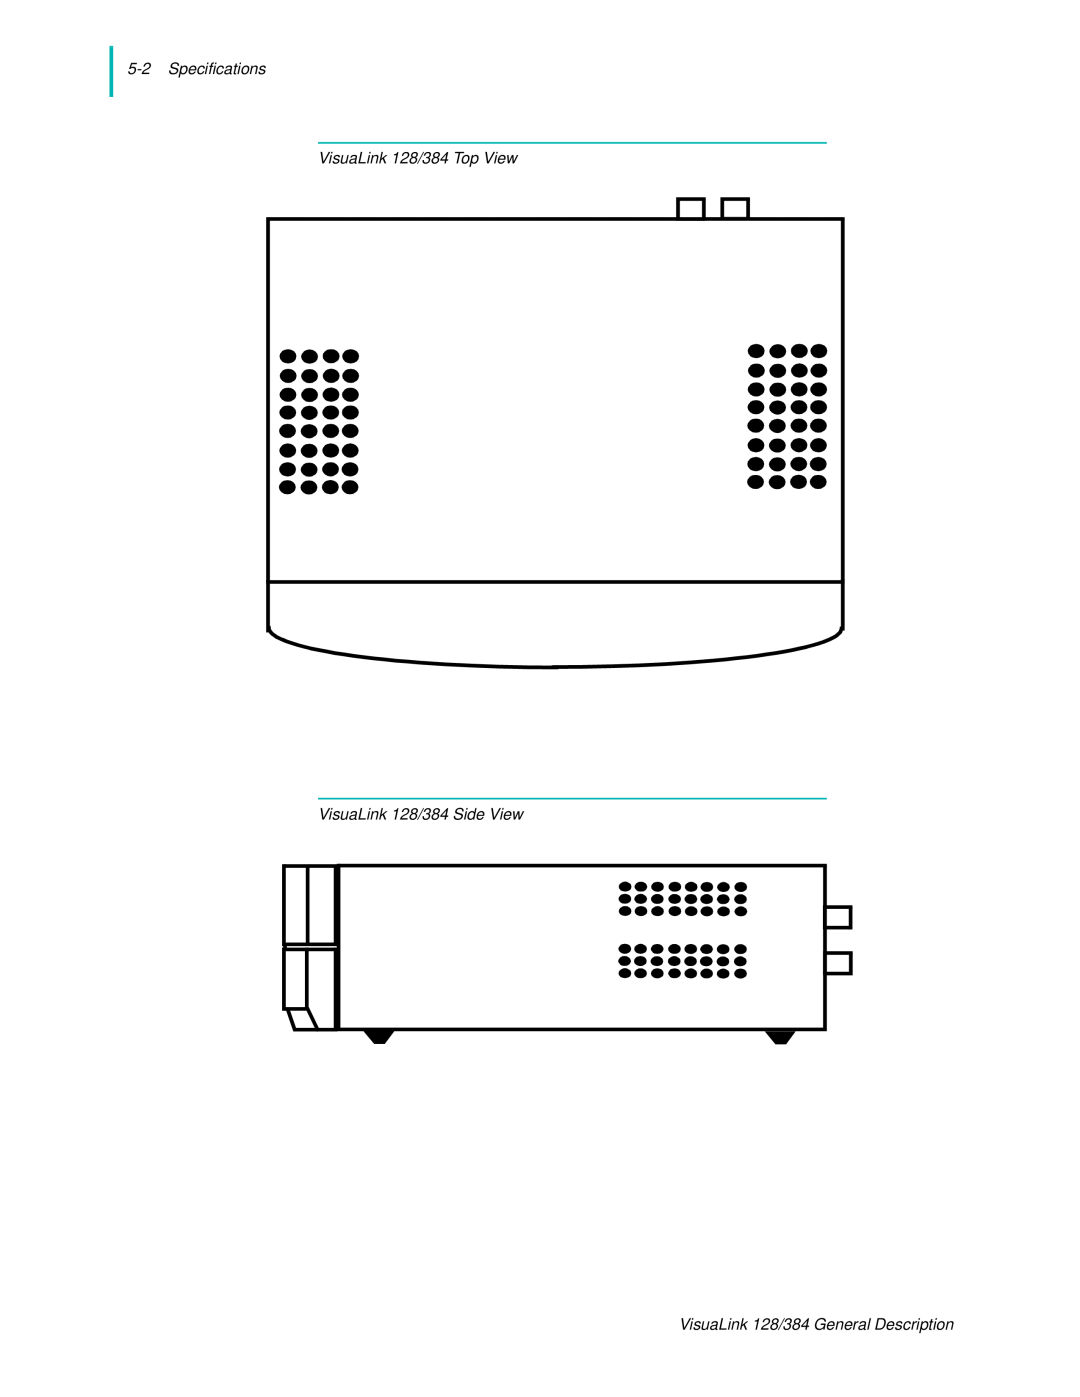 NEC 5-2Specifications VisuaLink 128/384 Top View, VisuaLink 128/384 Side View, VisuaLink 128/384 General Description 